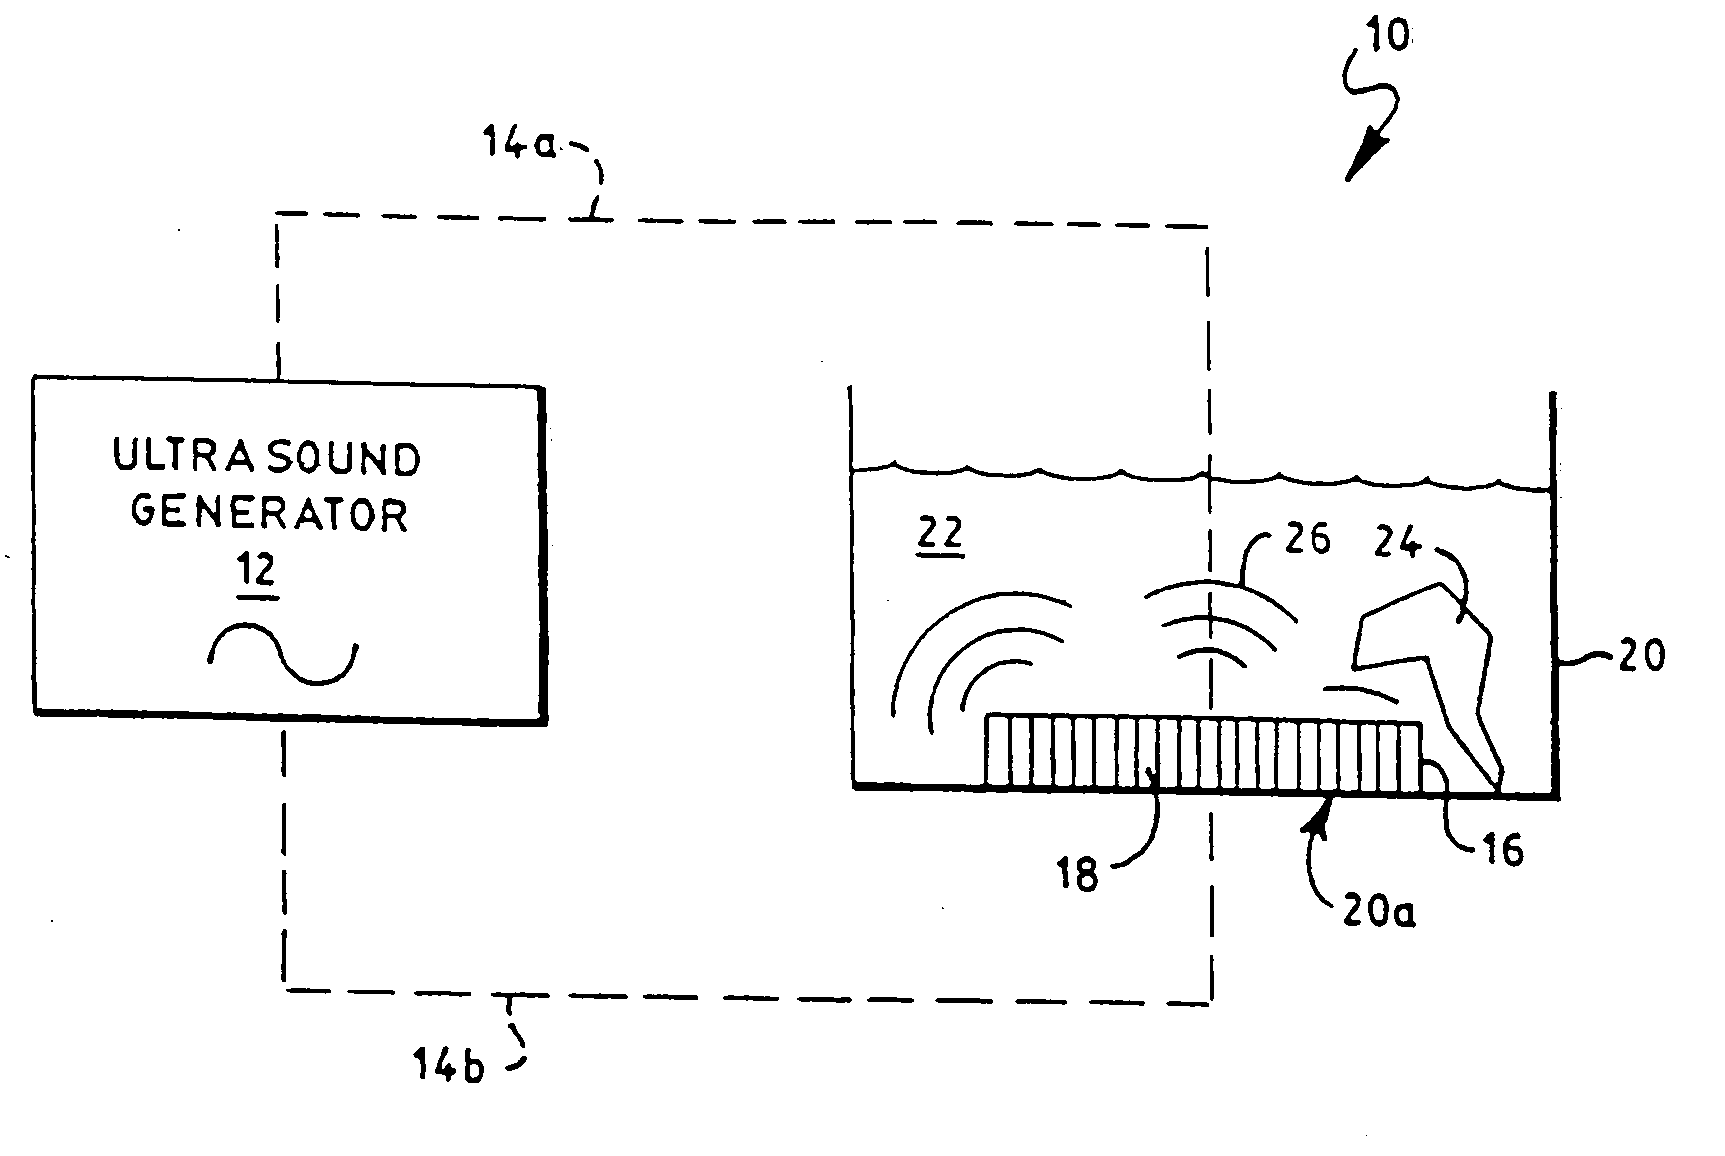 Apparatus, circuitry, signals and methods for cleaning and processing with sound